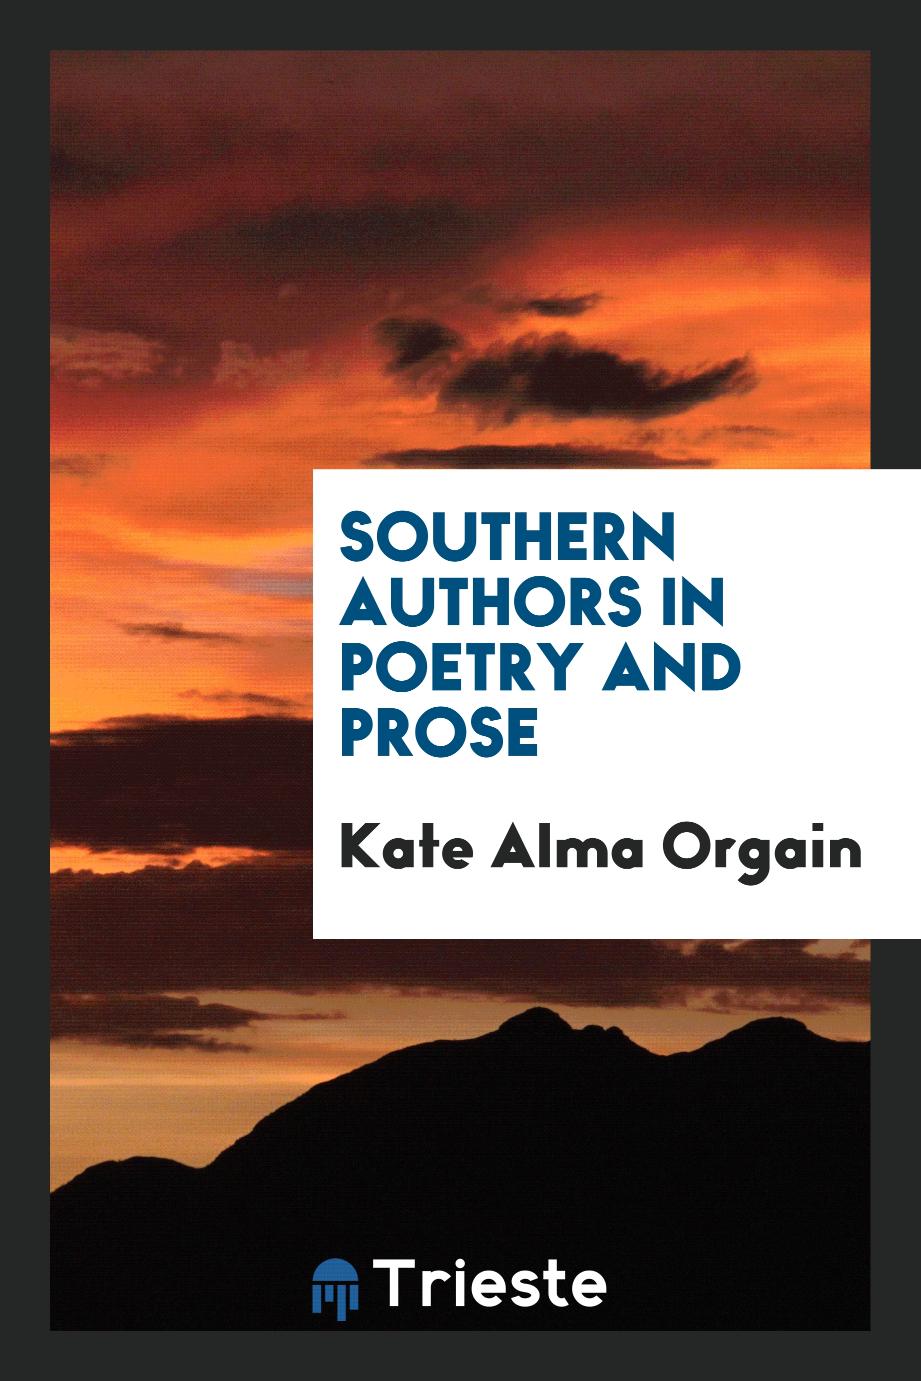 Southern authors in poetry and prose